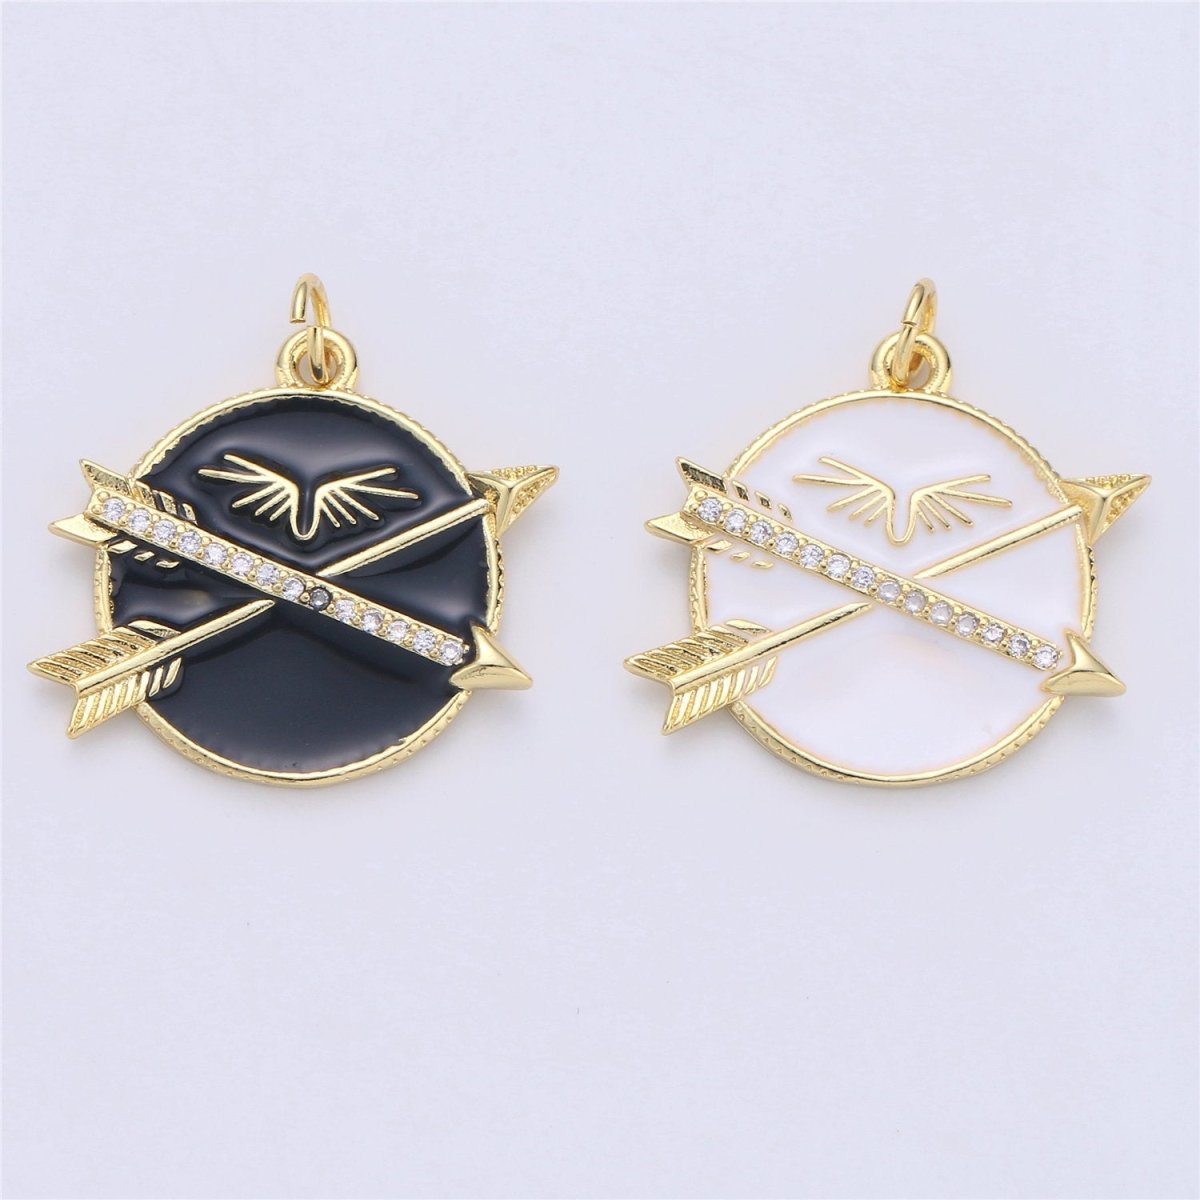 24k Gold Filled Medallion Pendant Black / White Enamel Arrow Necklace Charm for Statement Layer Necklace Component Supply, C-761 - DLUXCA